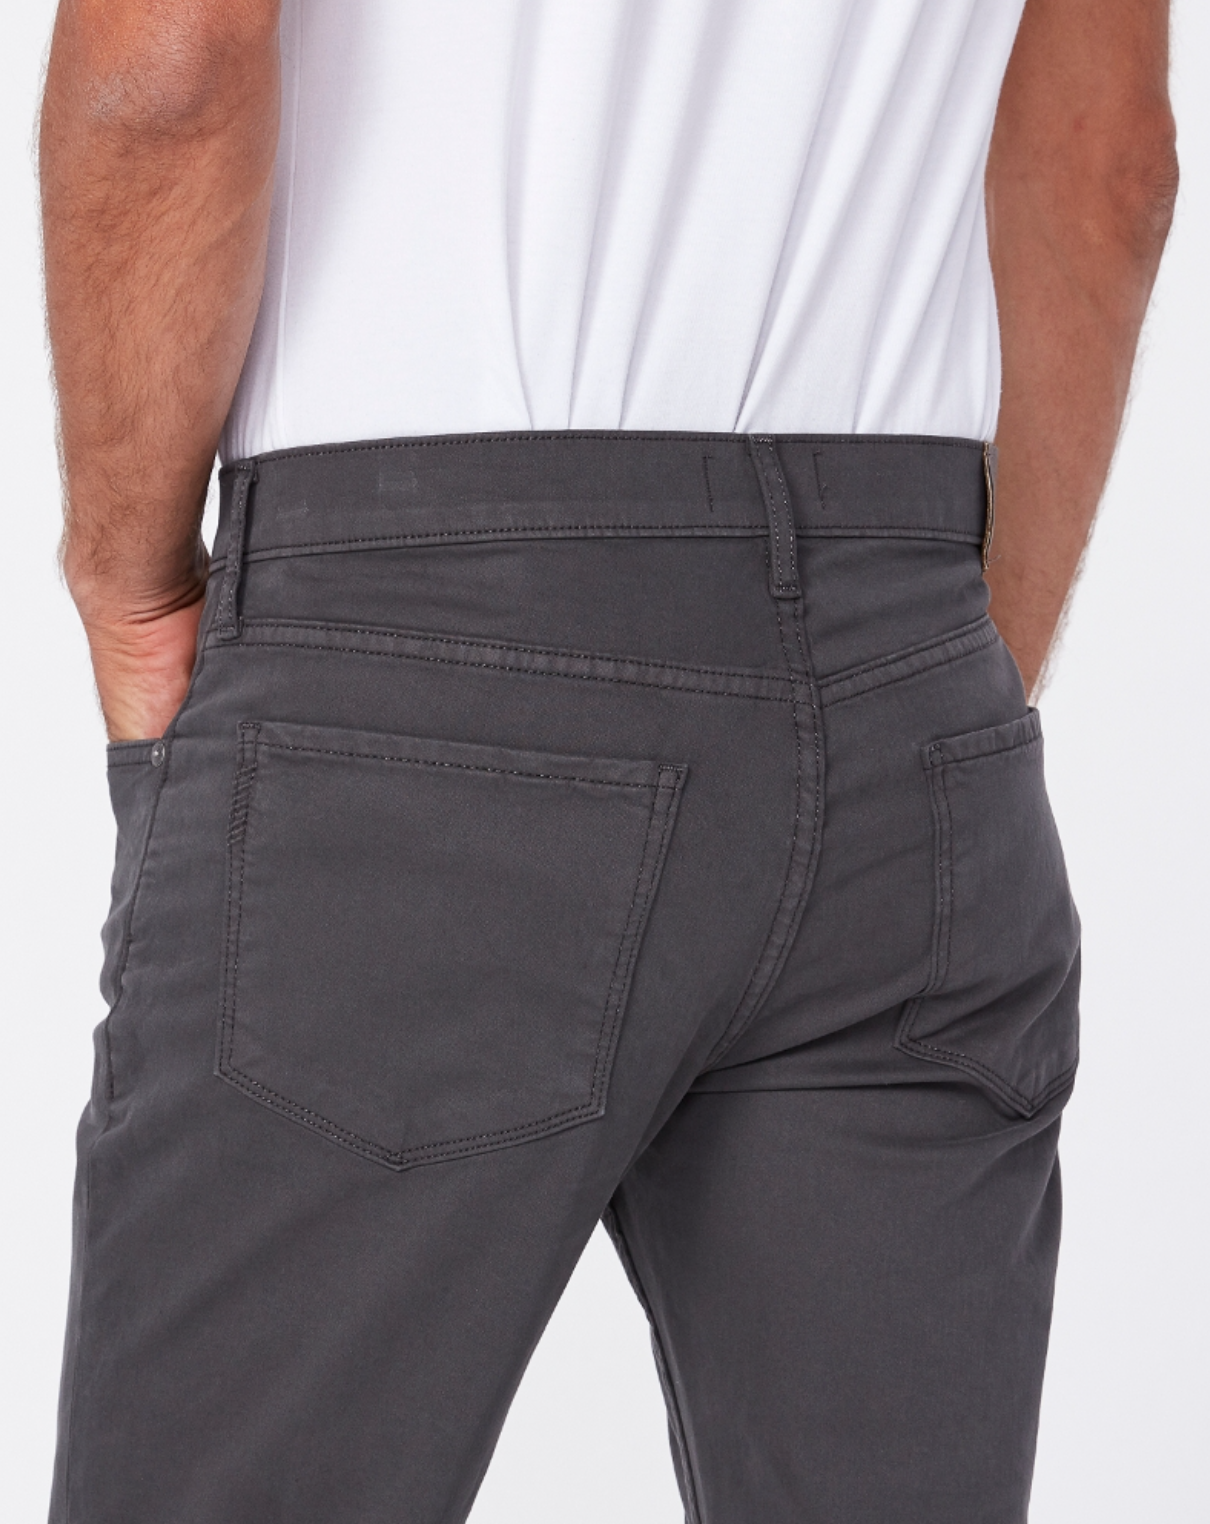 close up rear view of the lennox skinny fit twill pant from paige, showing rear pocket detail